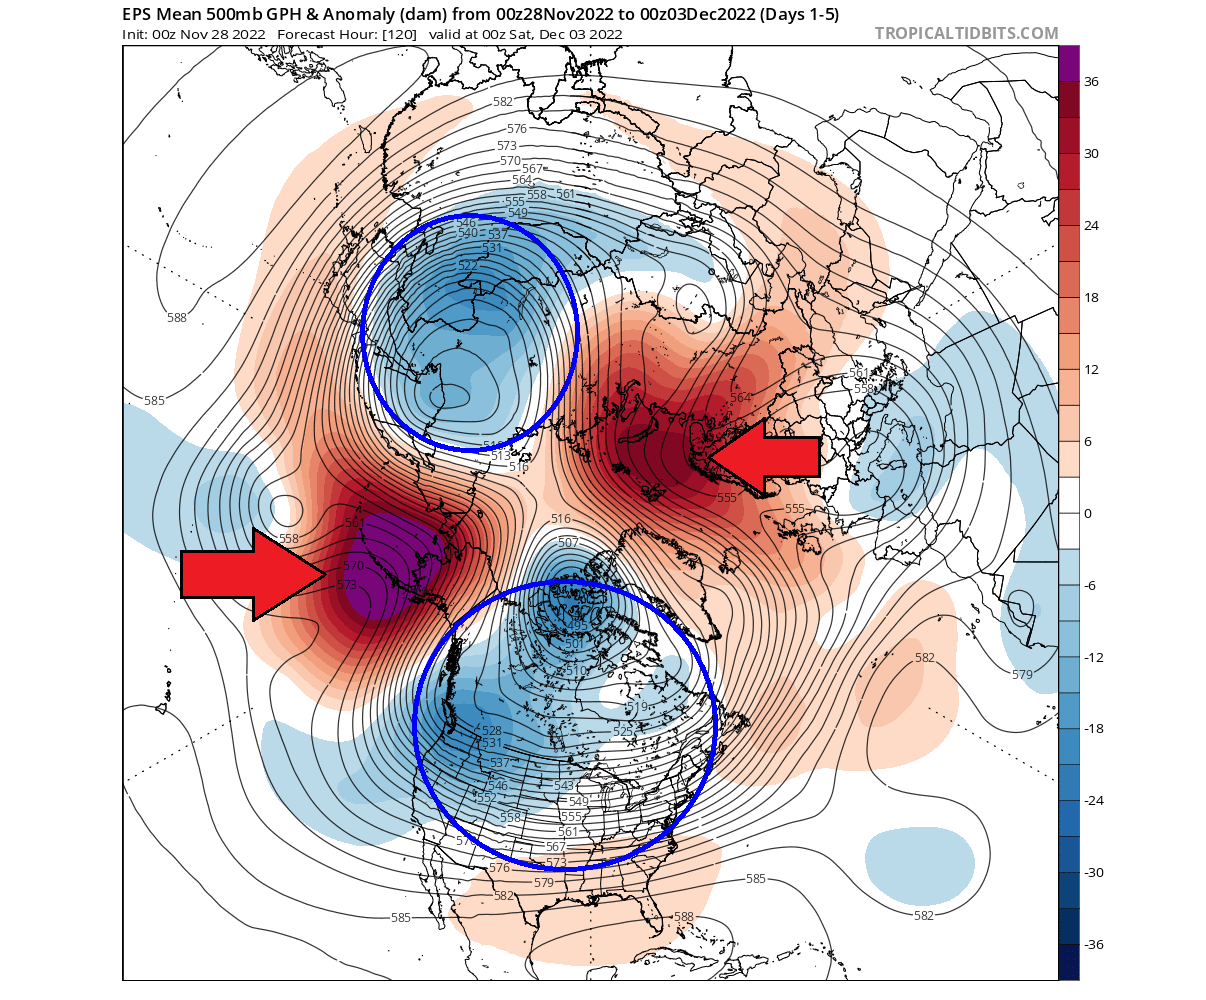 weather-forecast-winter-december-united-states-europe-pressure-anomaly-blocking-pattern-early-month